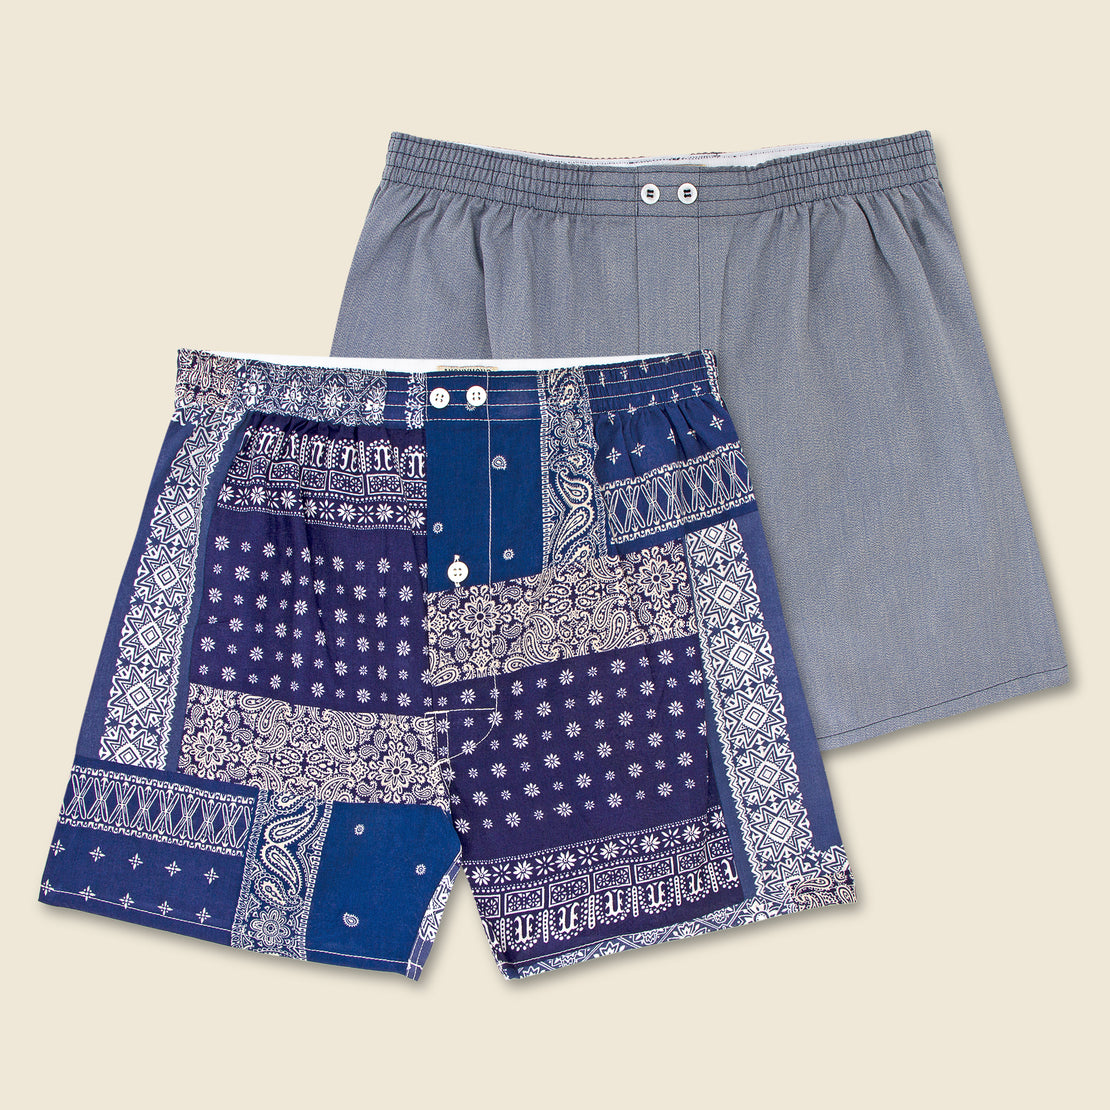 Anonymous Ism Bandana & Solid 2-Pack Boxers - Blue